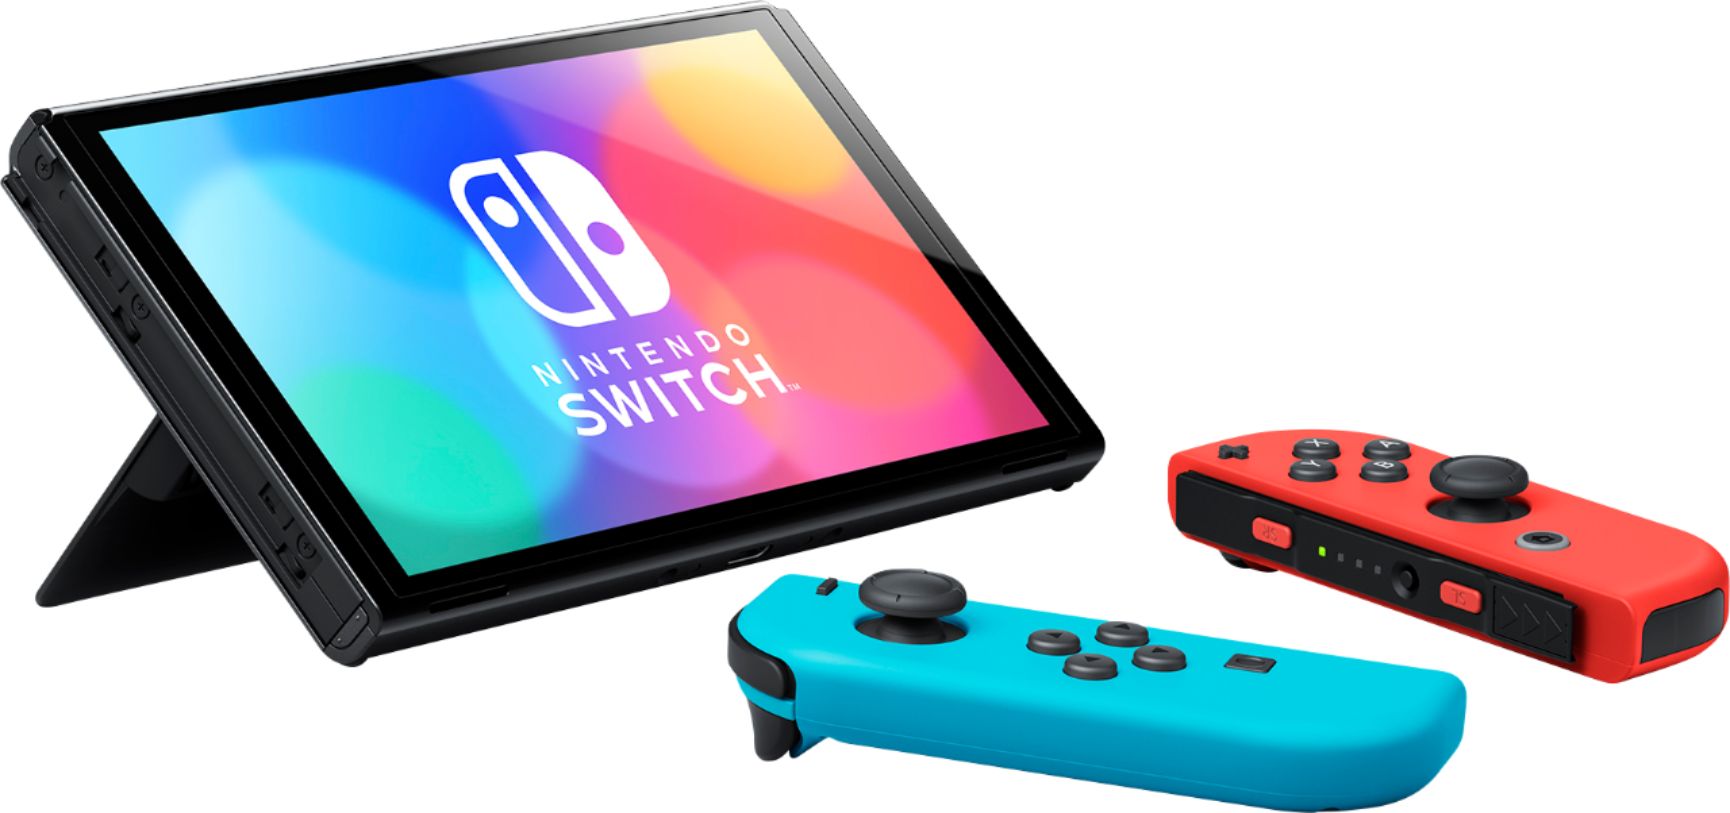 2022 New Nintendo Switch OLED Model Neon Red & Blue Joy Con 64GB Console HD Screen & LAN-Port Dock with The Legend of Zelda Link's Awakening, Mytrix Wireless Pro Controller and Accessories